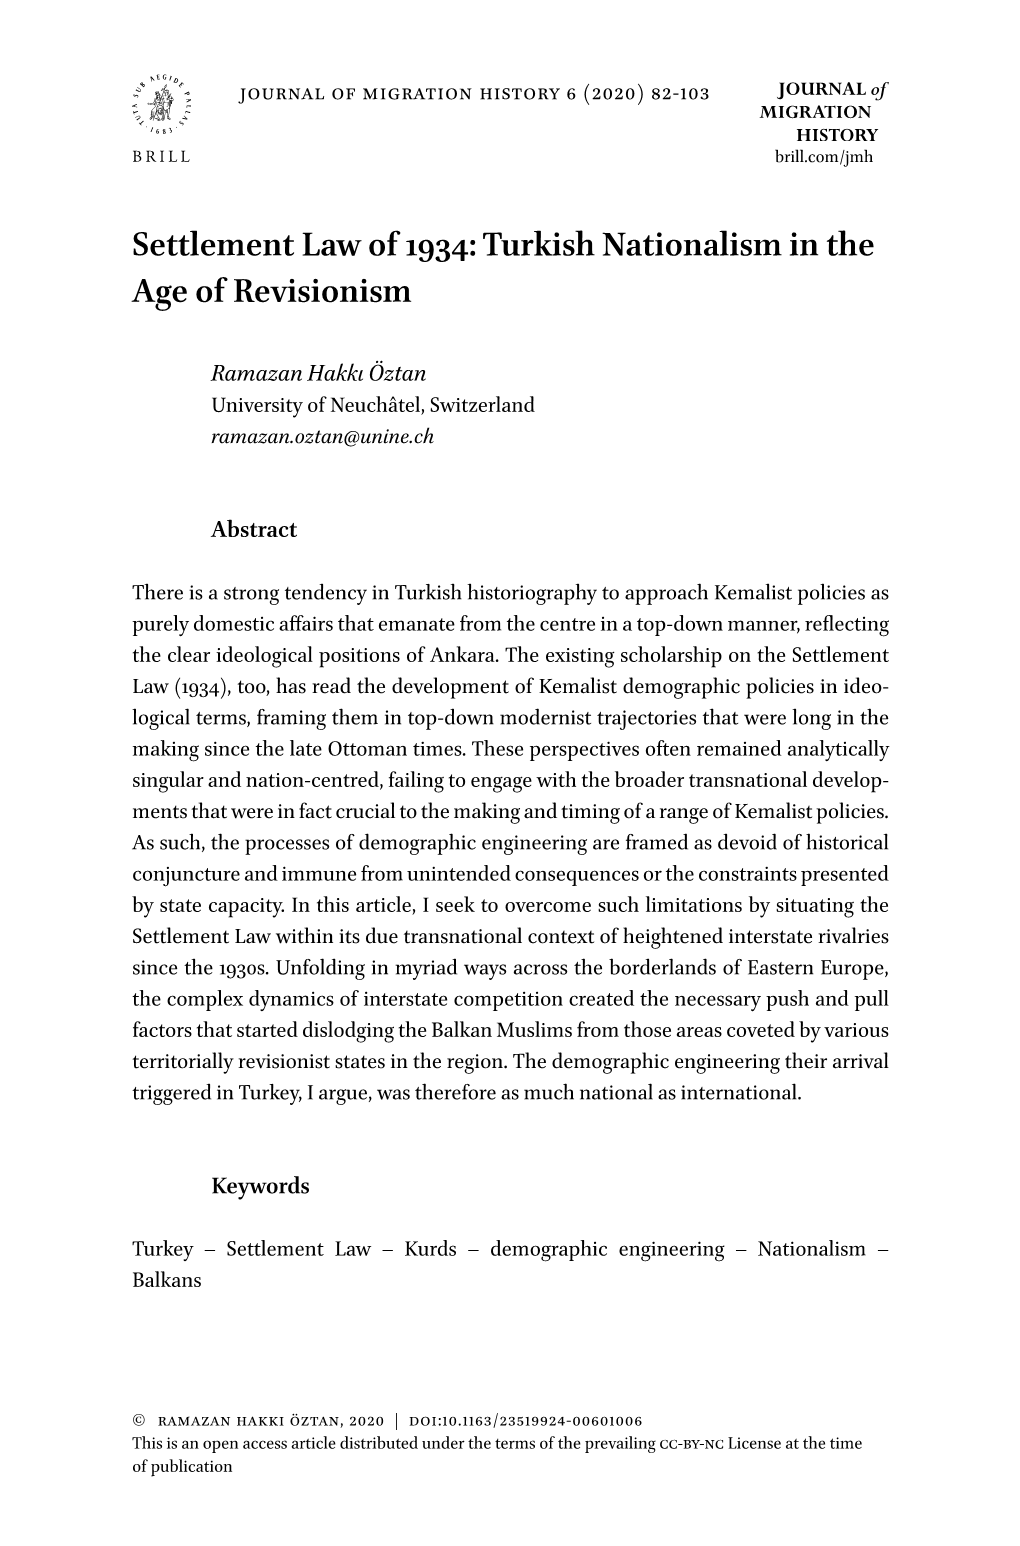 Settlement Law of 1934: Turkish Nationalism in the Age of Revisionism